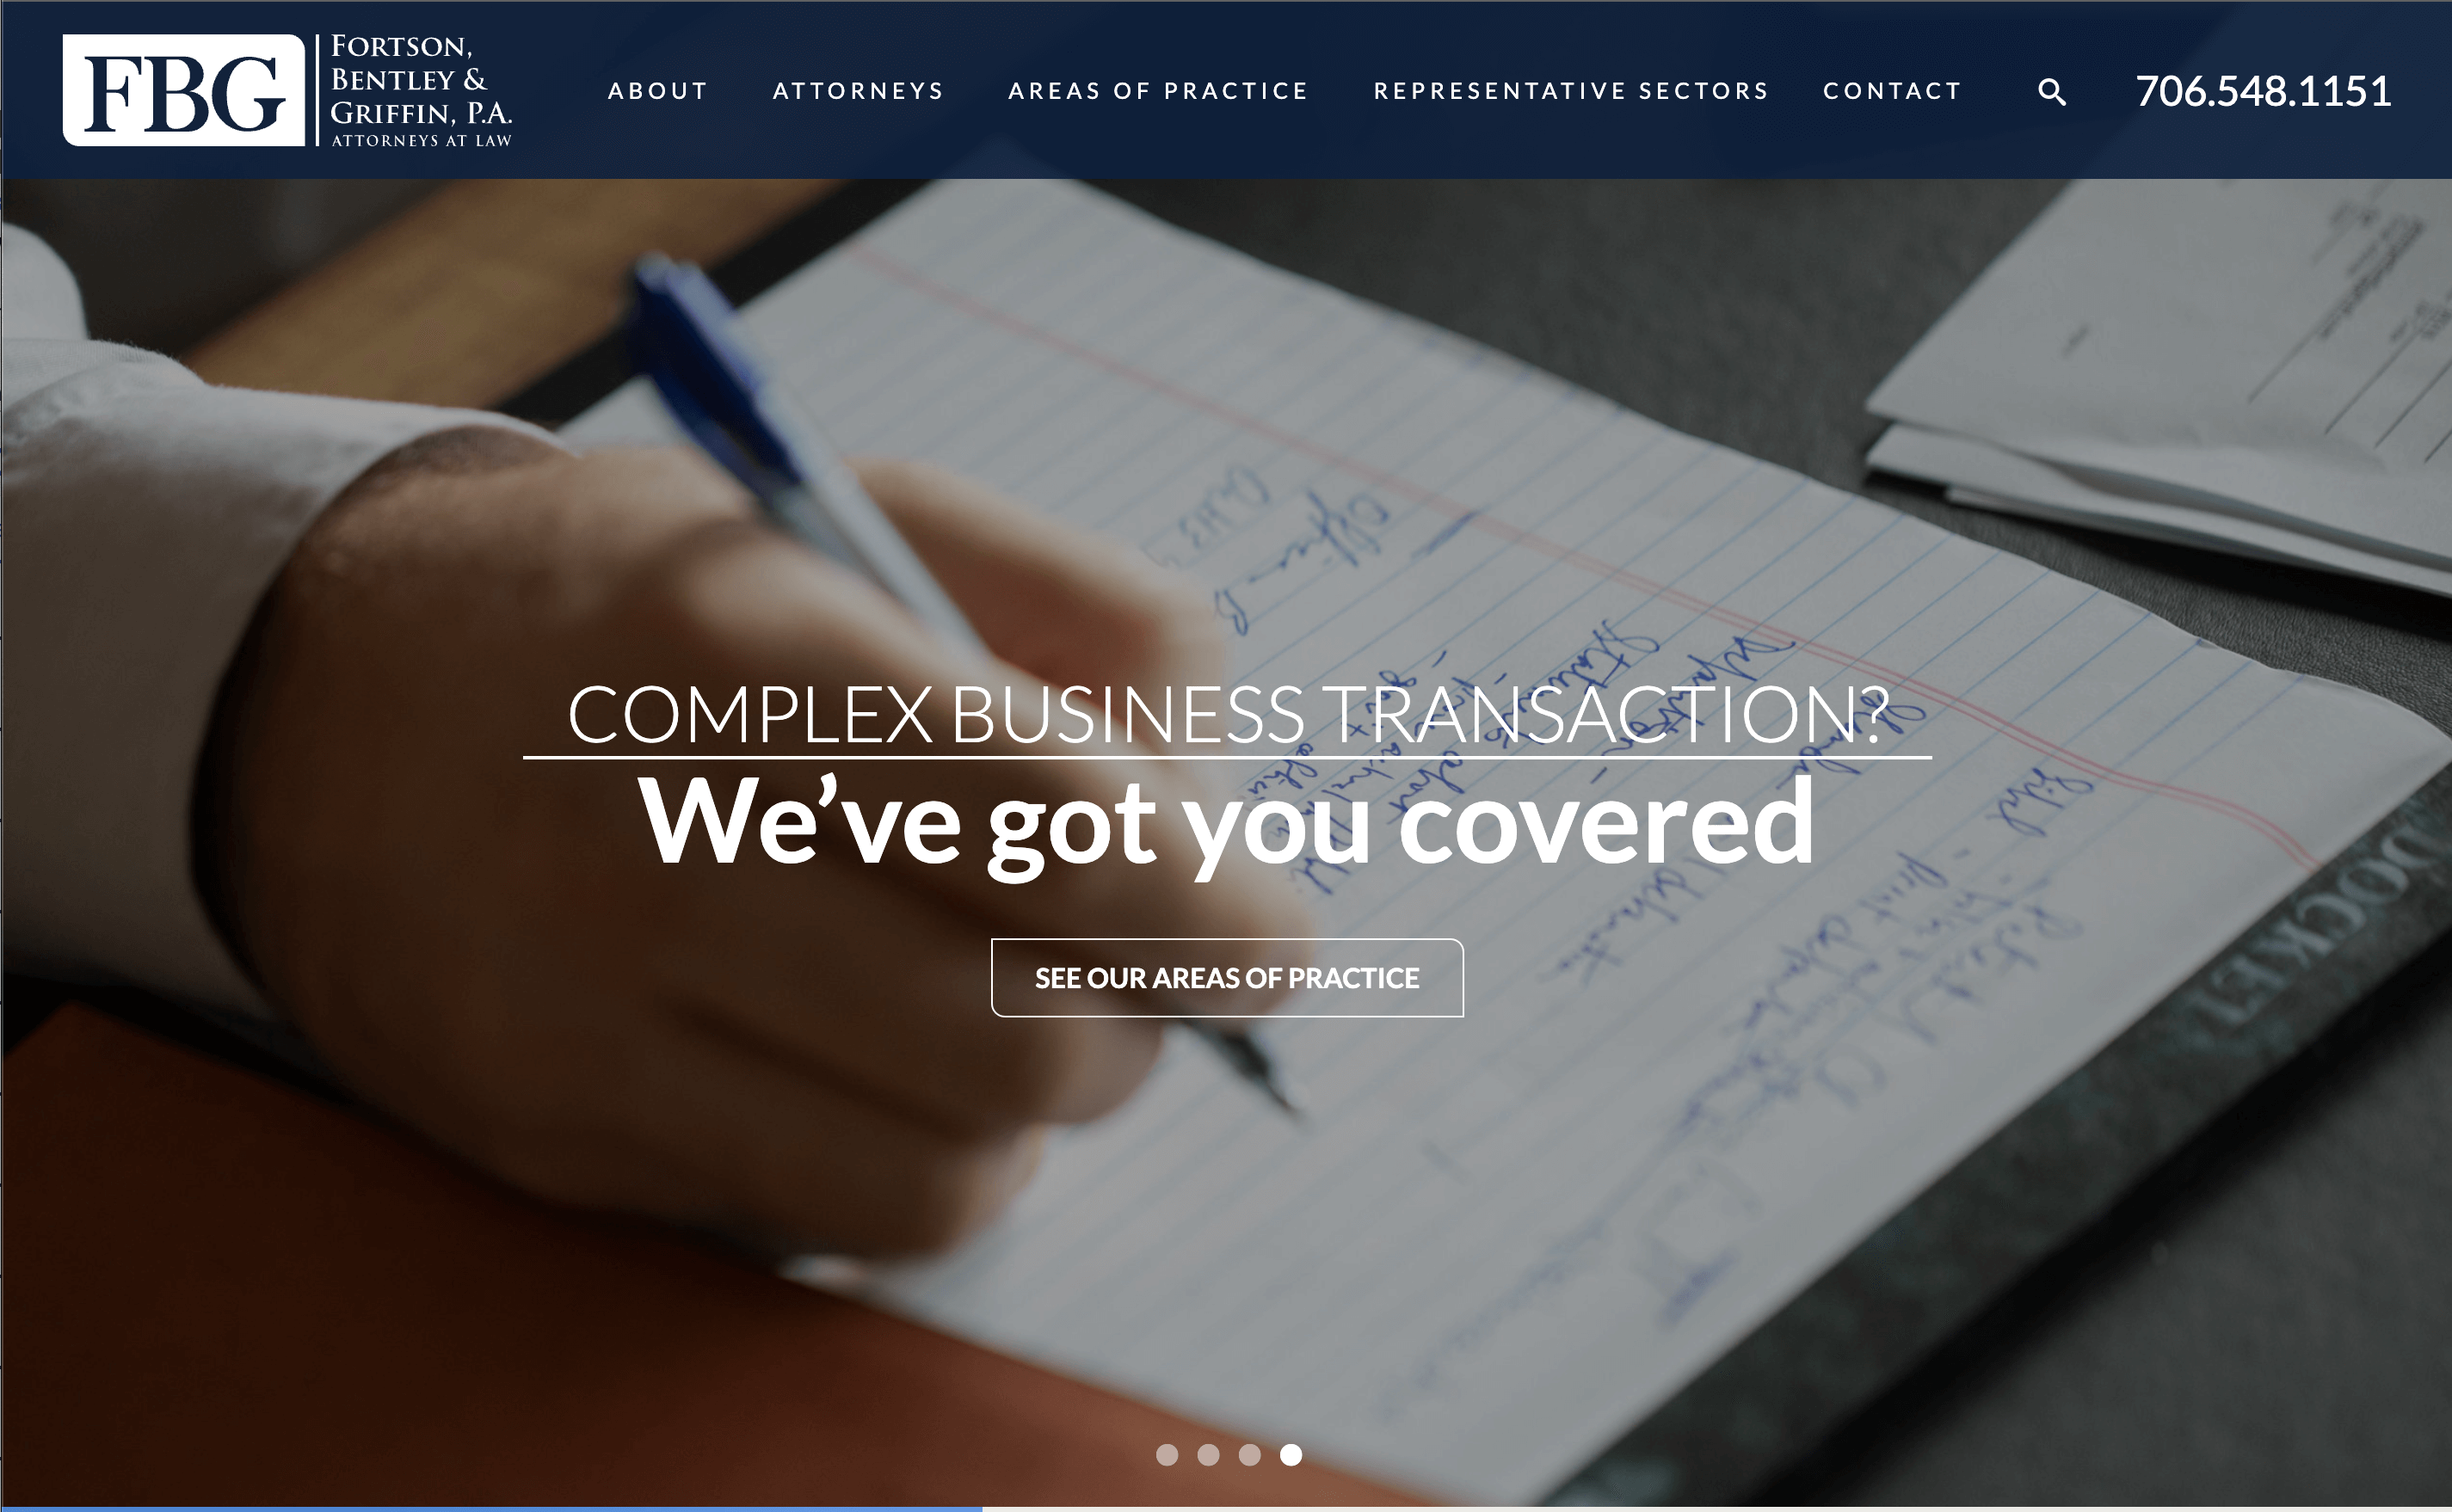 FBG's website featuring the words "complex business transaction? We've got you covered" over a closeup photo of a hand writing on a legal pad